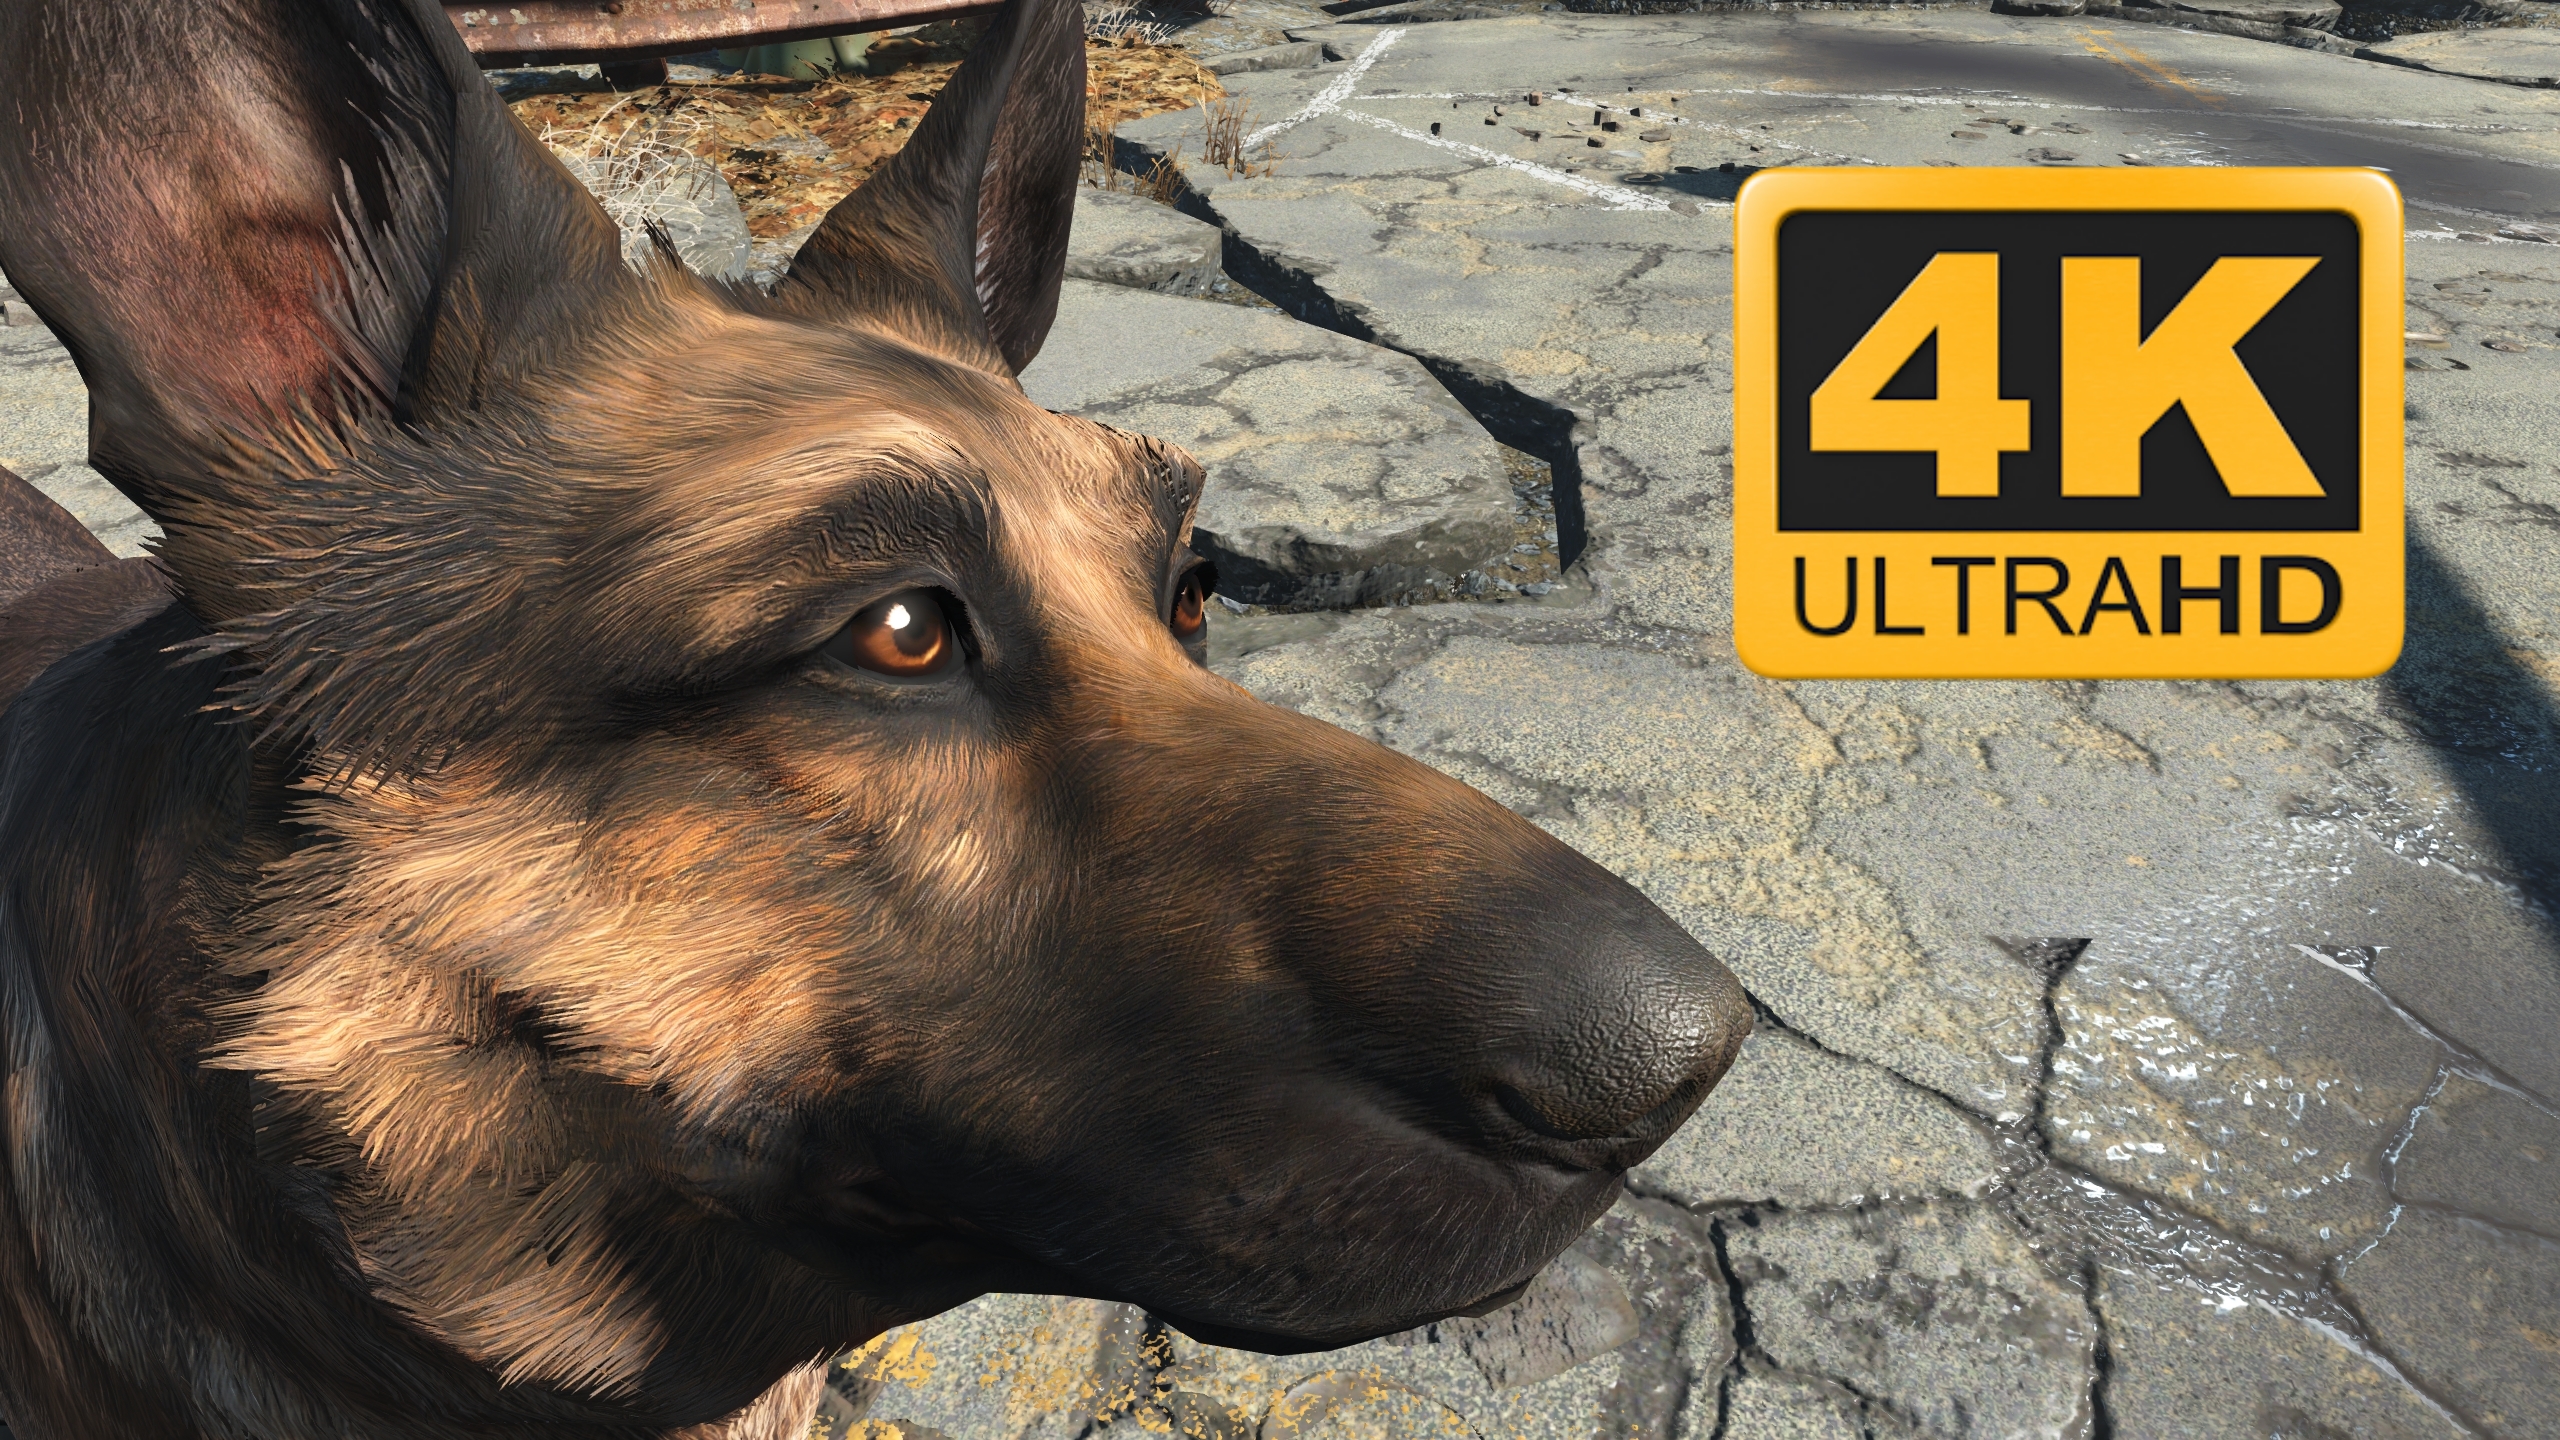 Image 4 - 4K Dogmeat mod for Fallout 4 - Mod DB